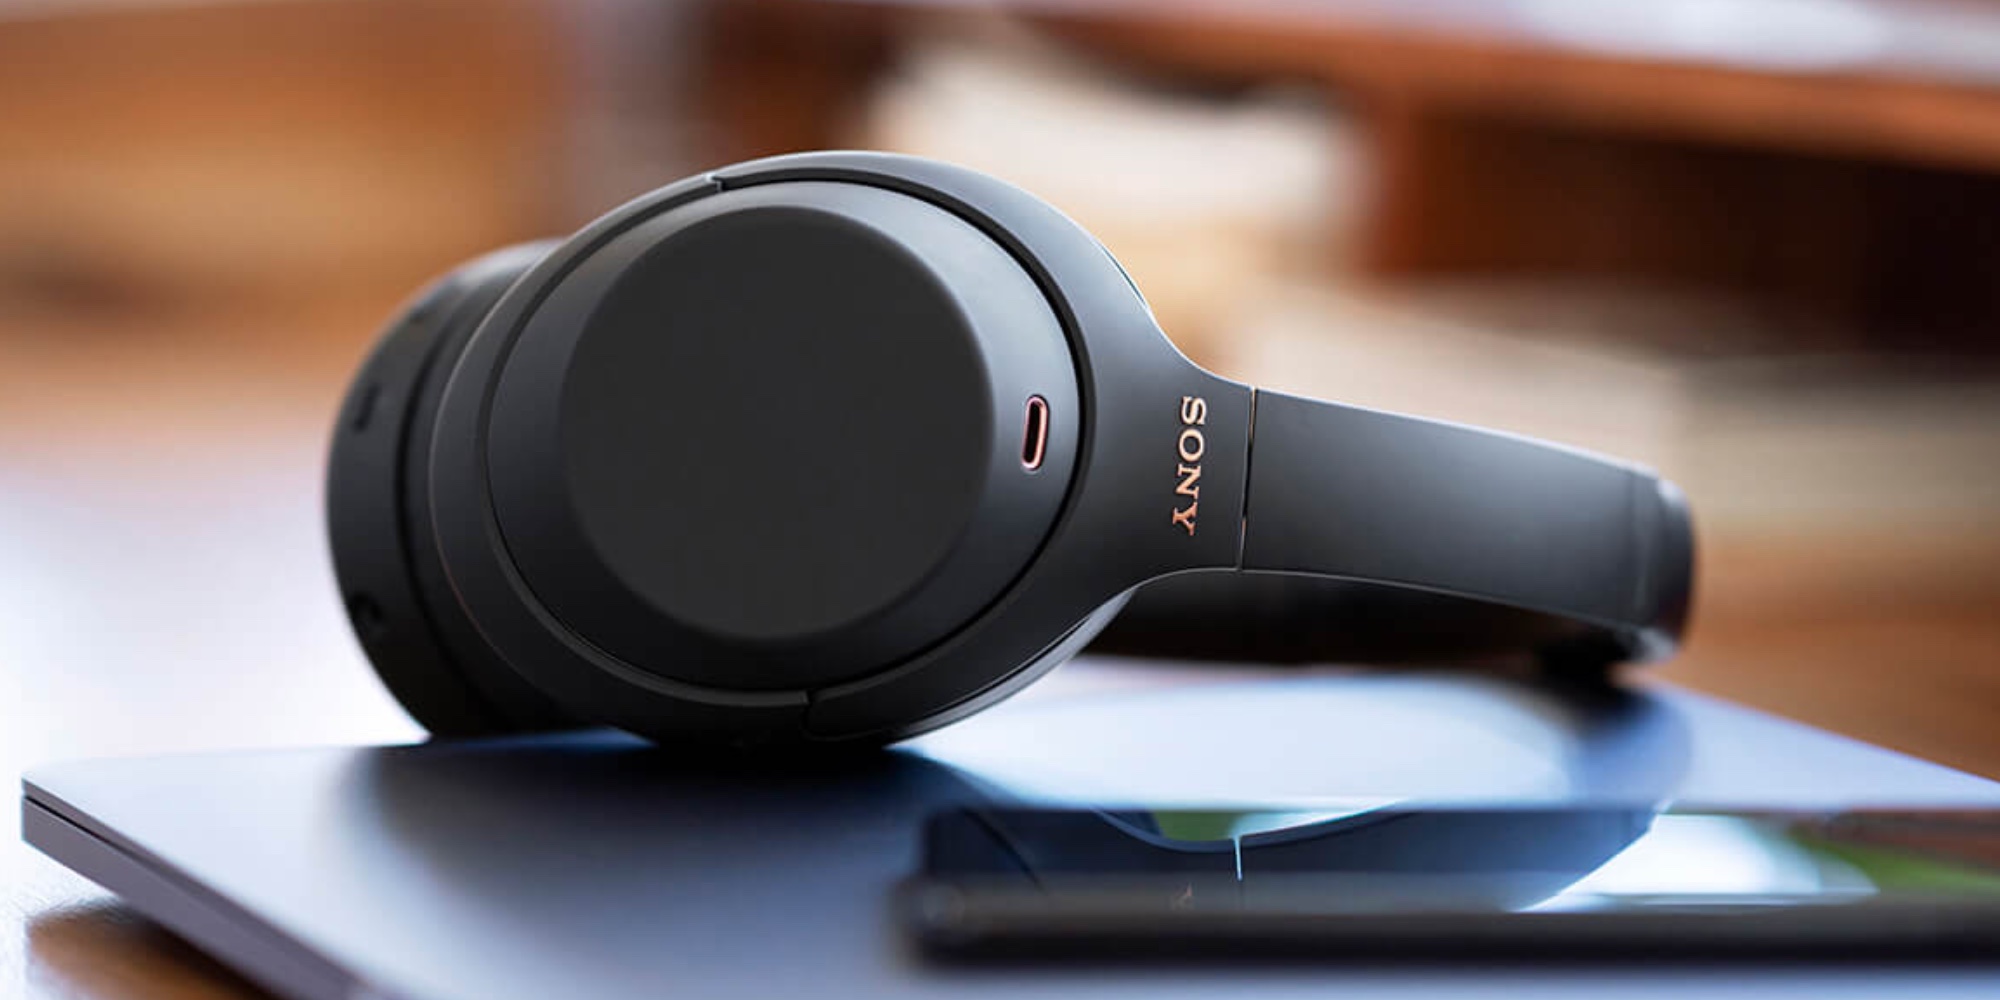 Sony's WH-1000XM5 headphones come with a new design, $50 price hike